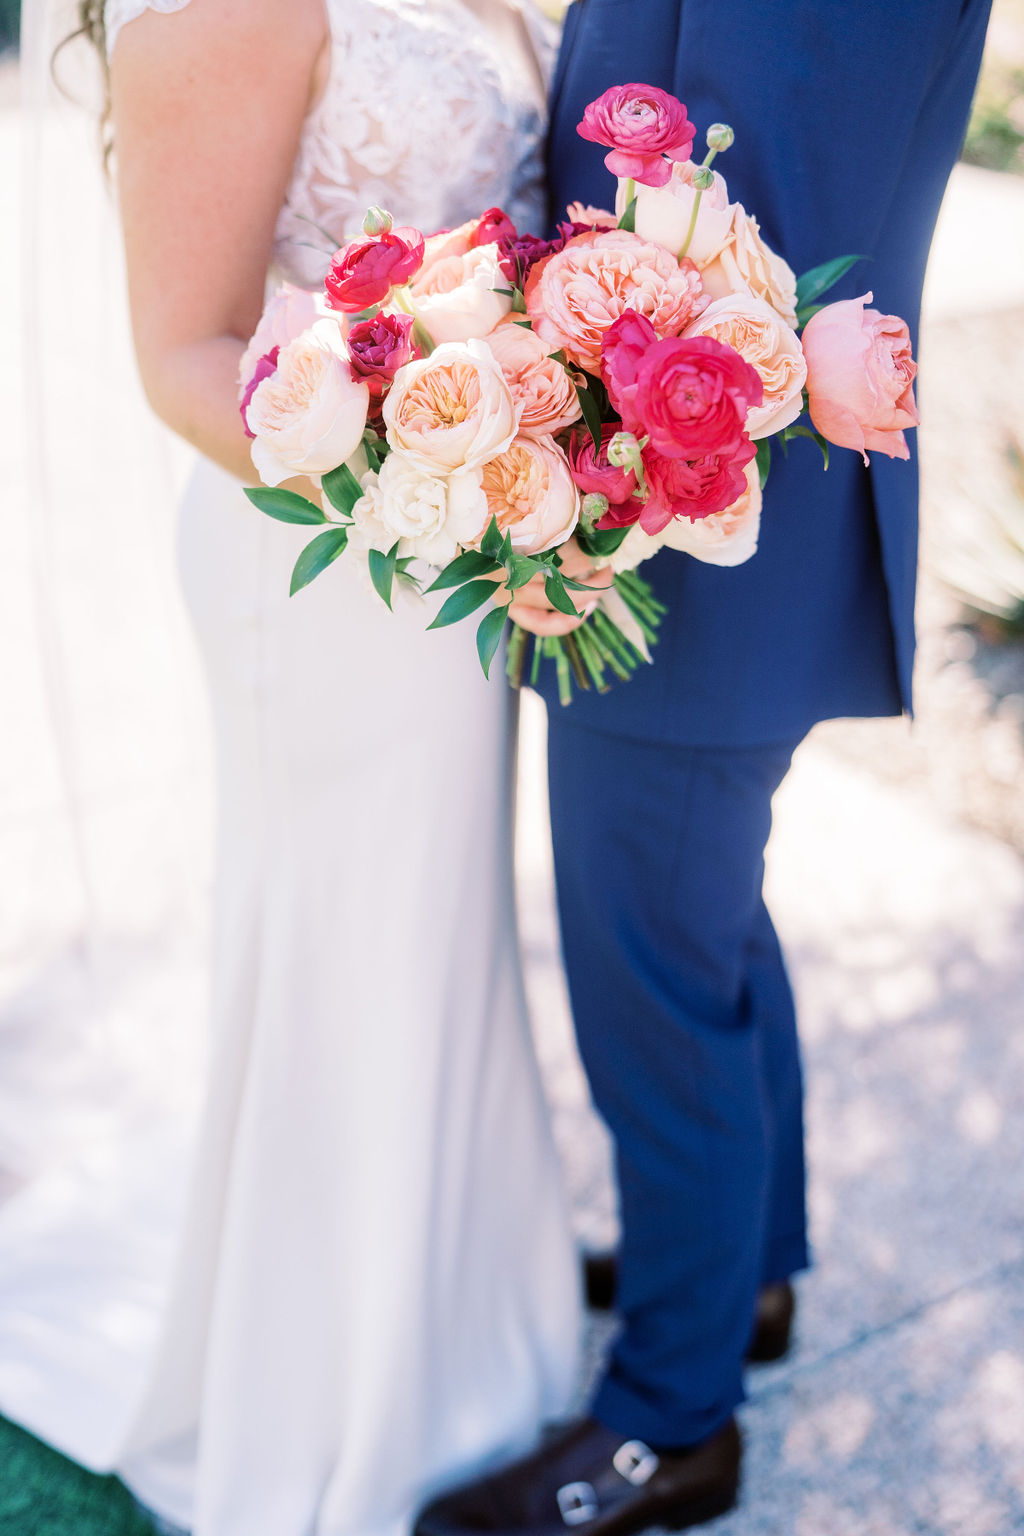 Bridal bouquet of pink and peach flowers including ranunculus and roses.